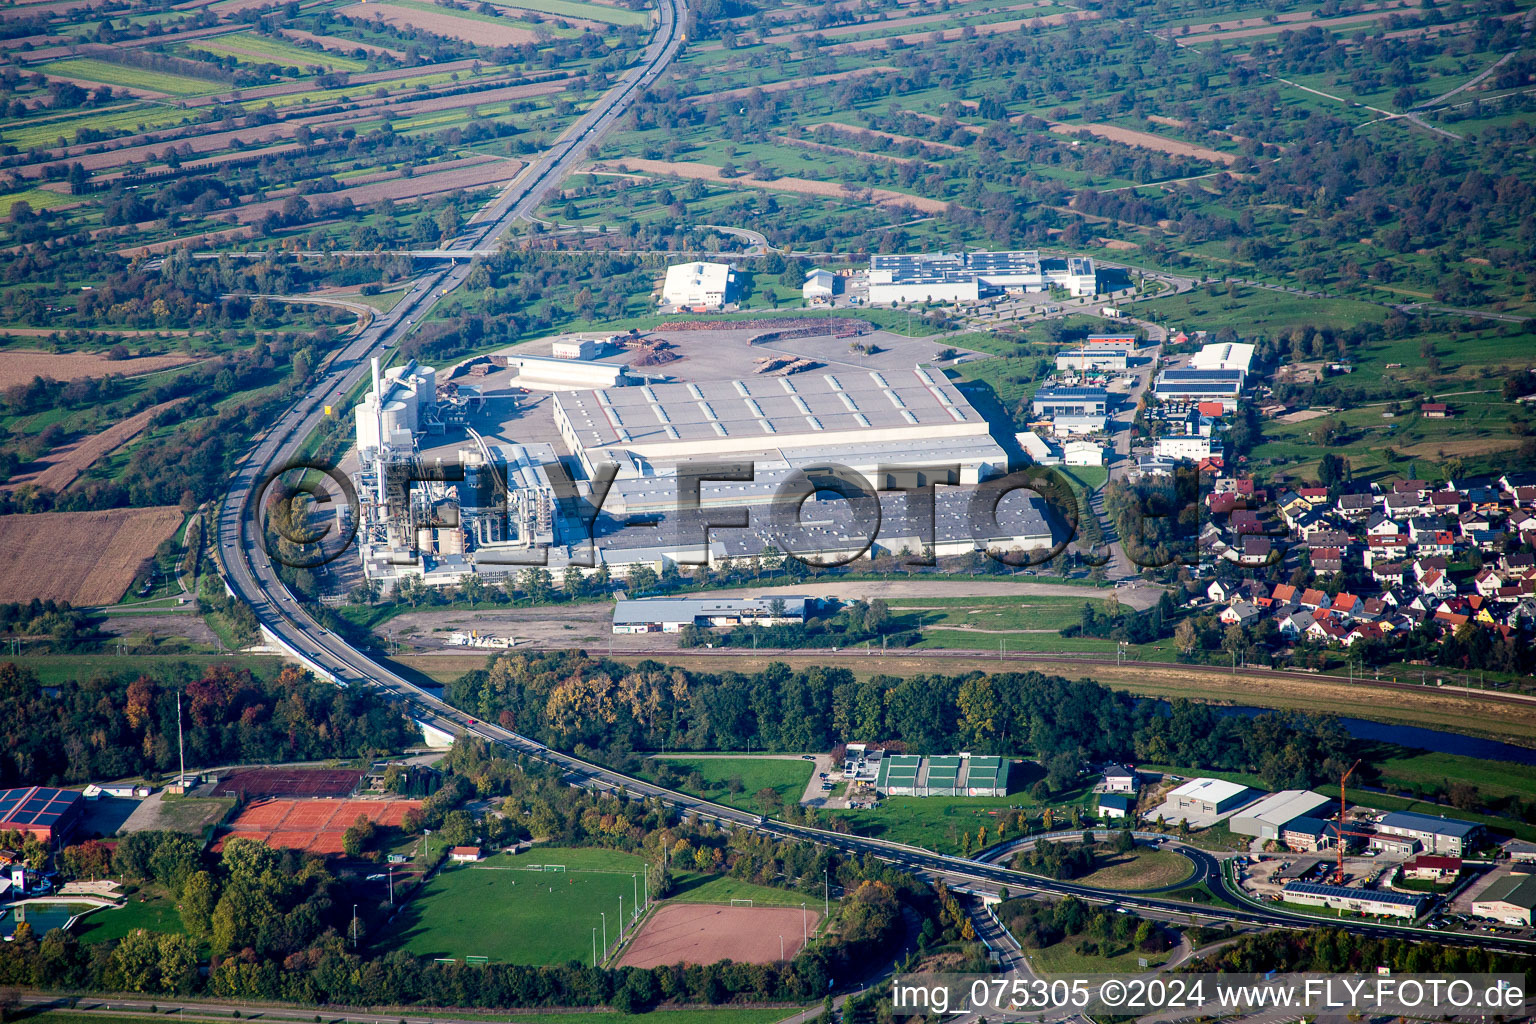 Aerial view of Building and production halls on the premises of Spanplattenfabirk Kronospan GmbH in Bischweier in the state Baden-Wurttemberg, Germany